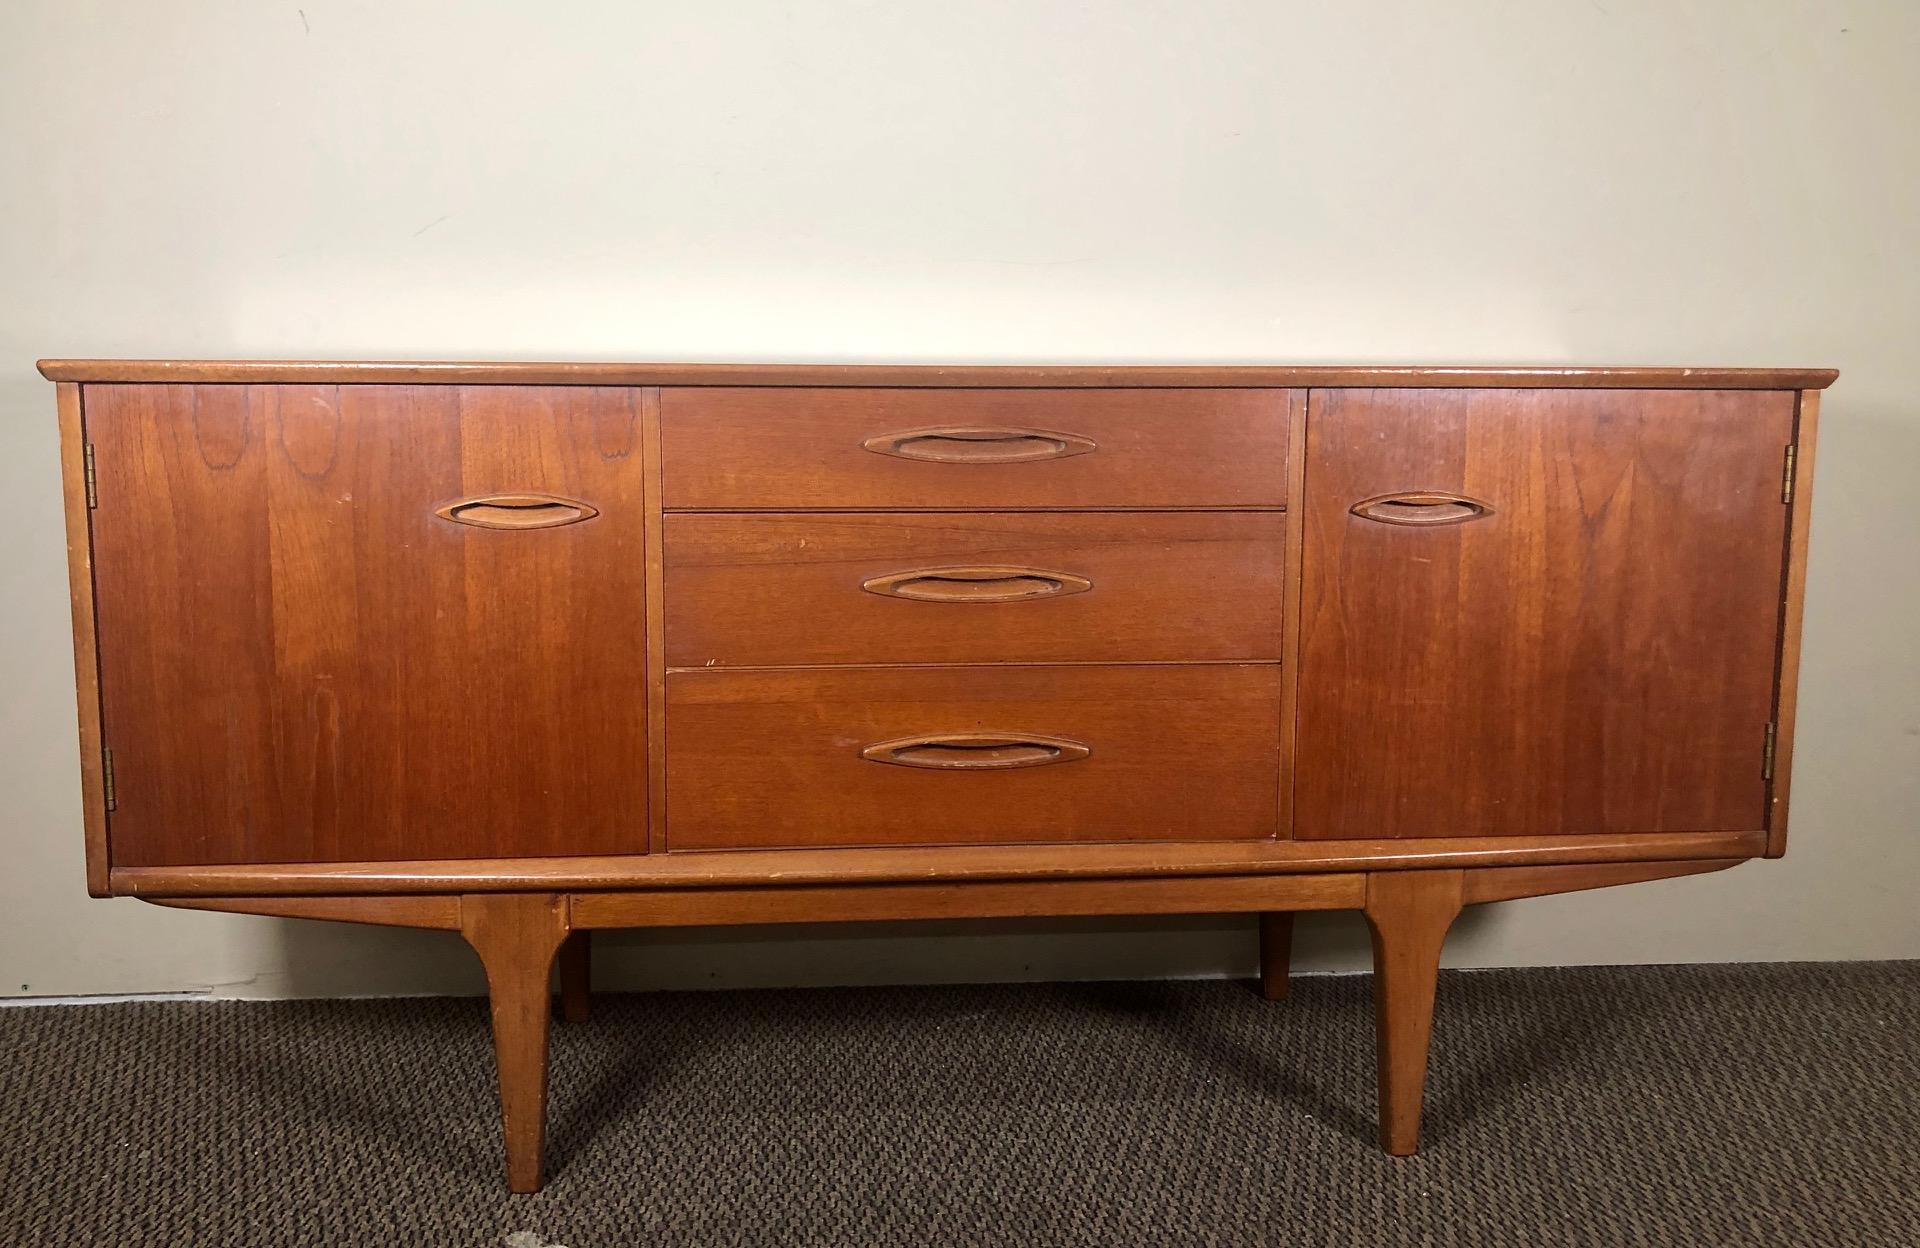 1960s credenza by Jentique. Made in England.

Three drawers in the middle flanked by a cabinet with a fixed shelf on either side.

Very good condition. Minor marks on the top. Small chips and scuffs here and there from normal use. Please see